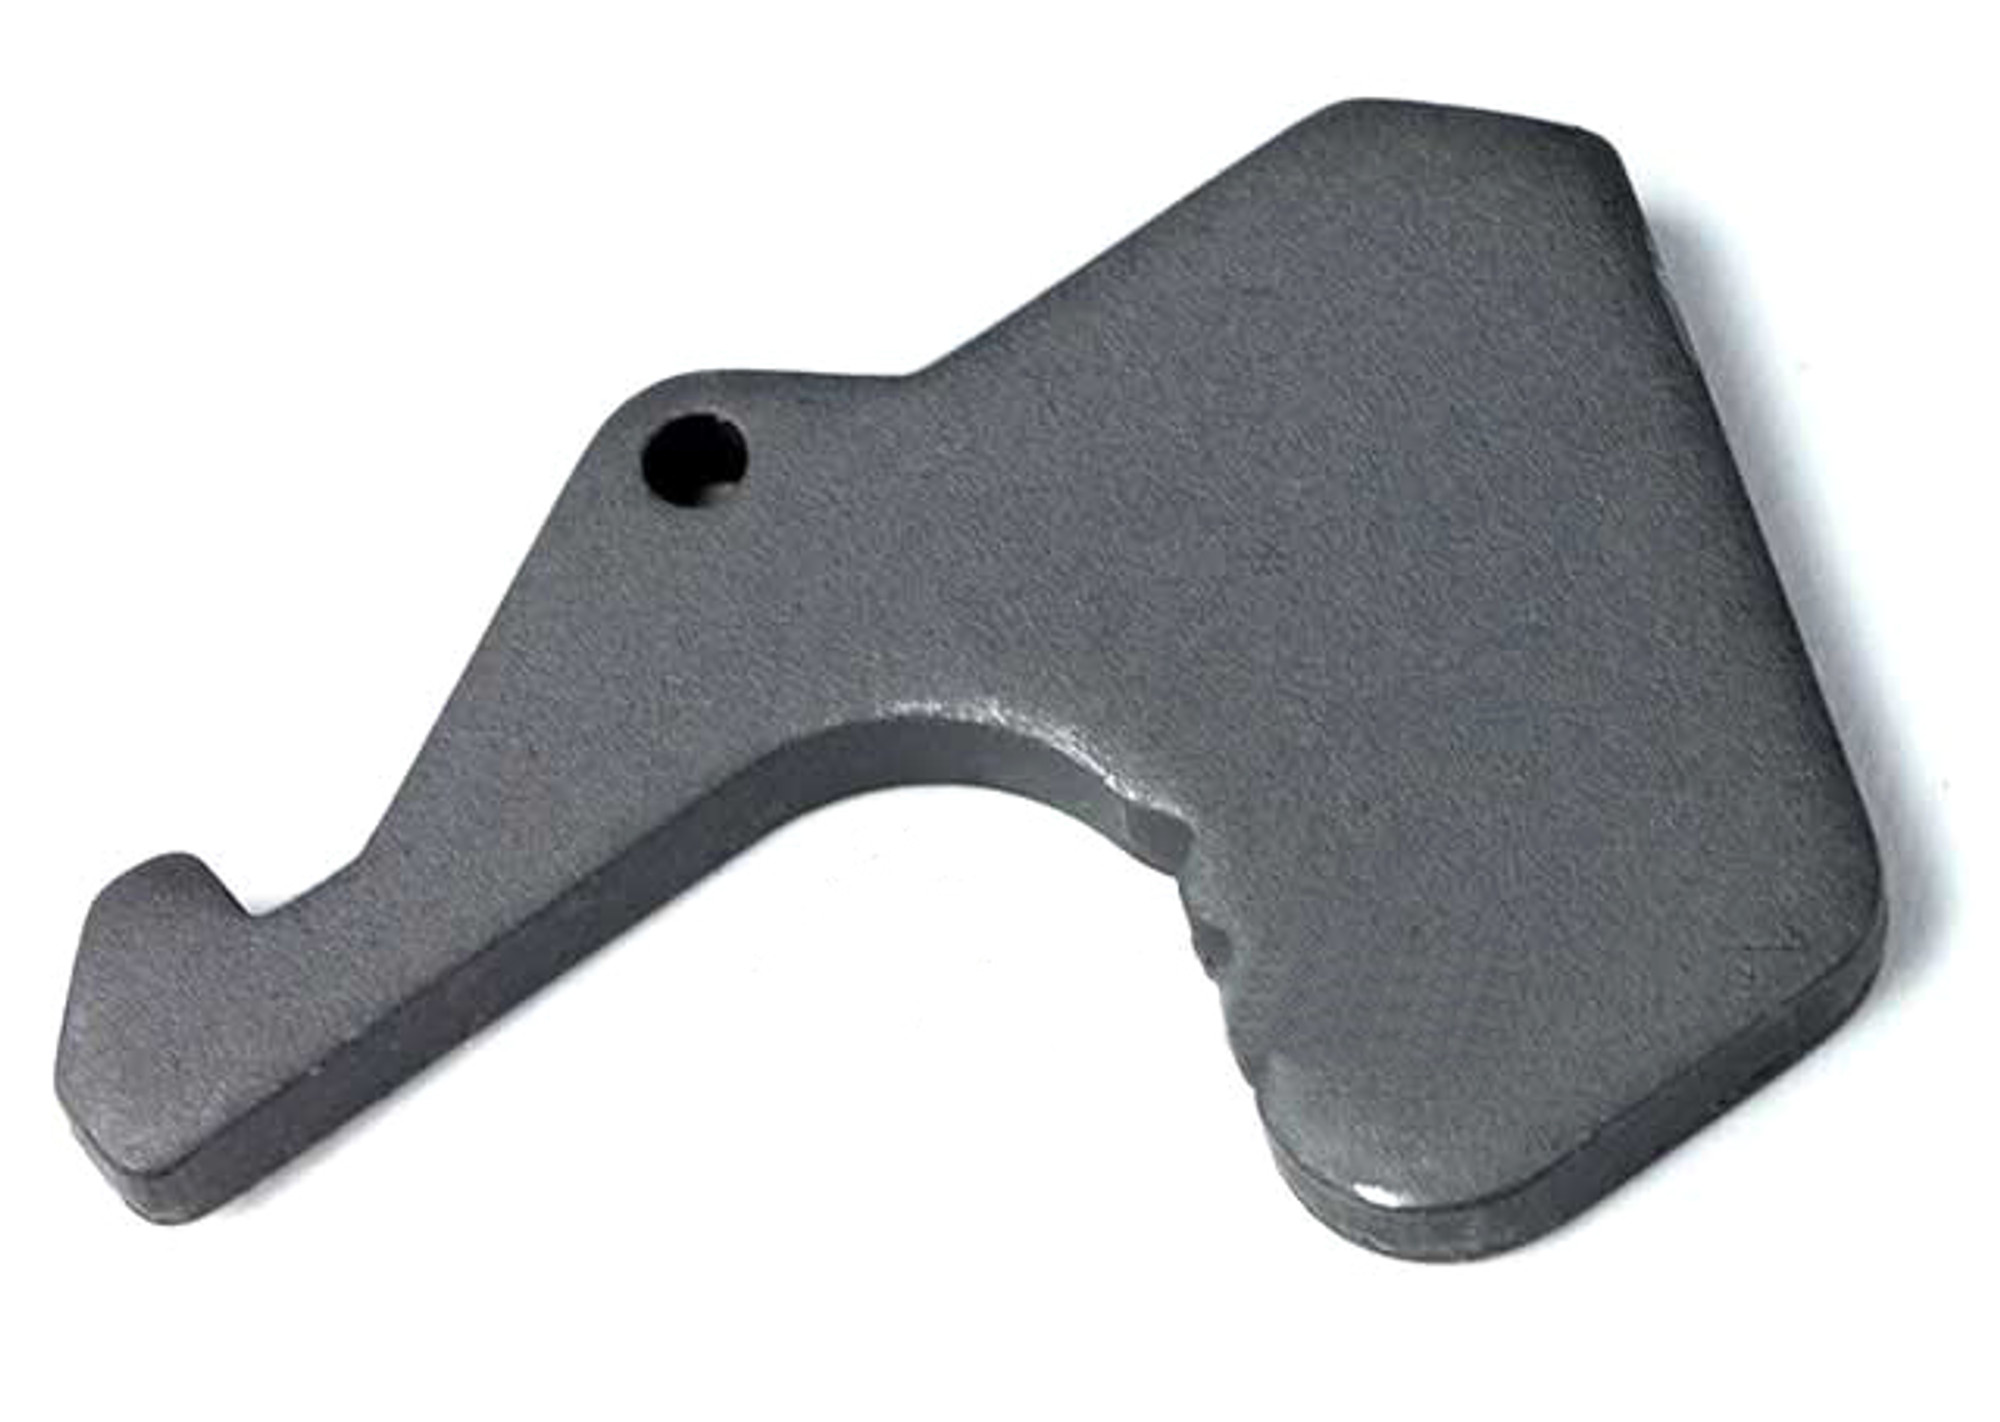 Replacement Charging Handle Latch for WE AWSS Airsoft Gas Blowback Rifle